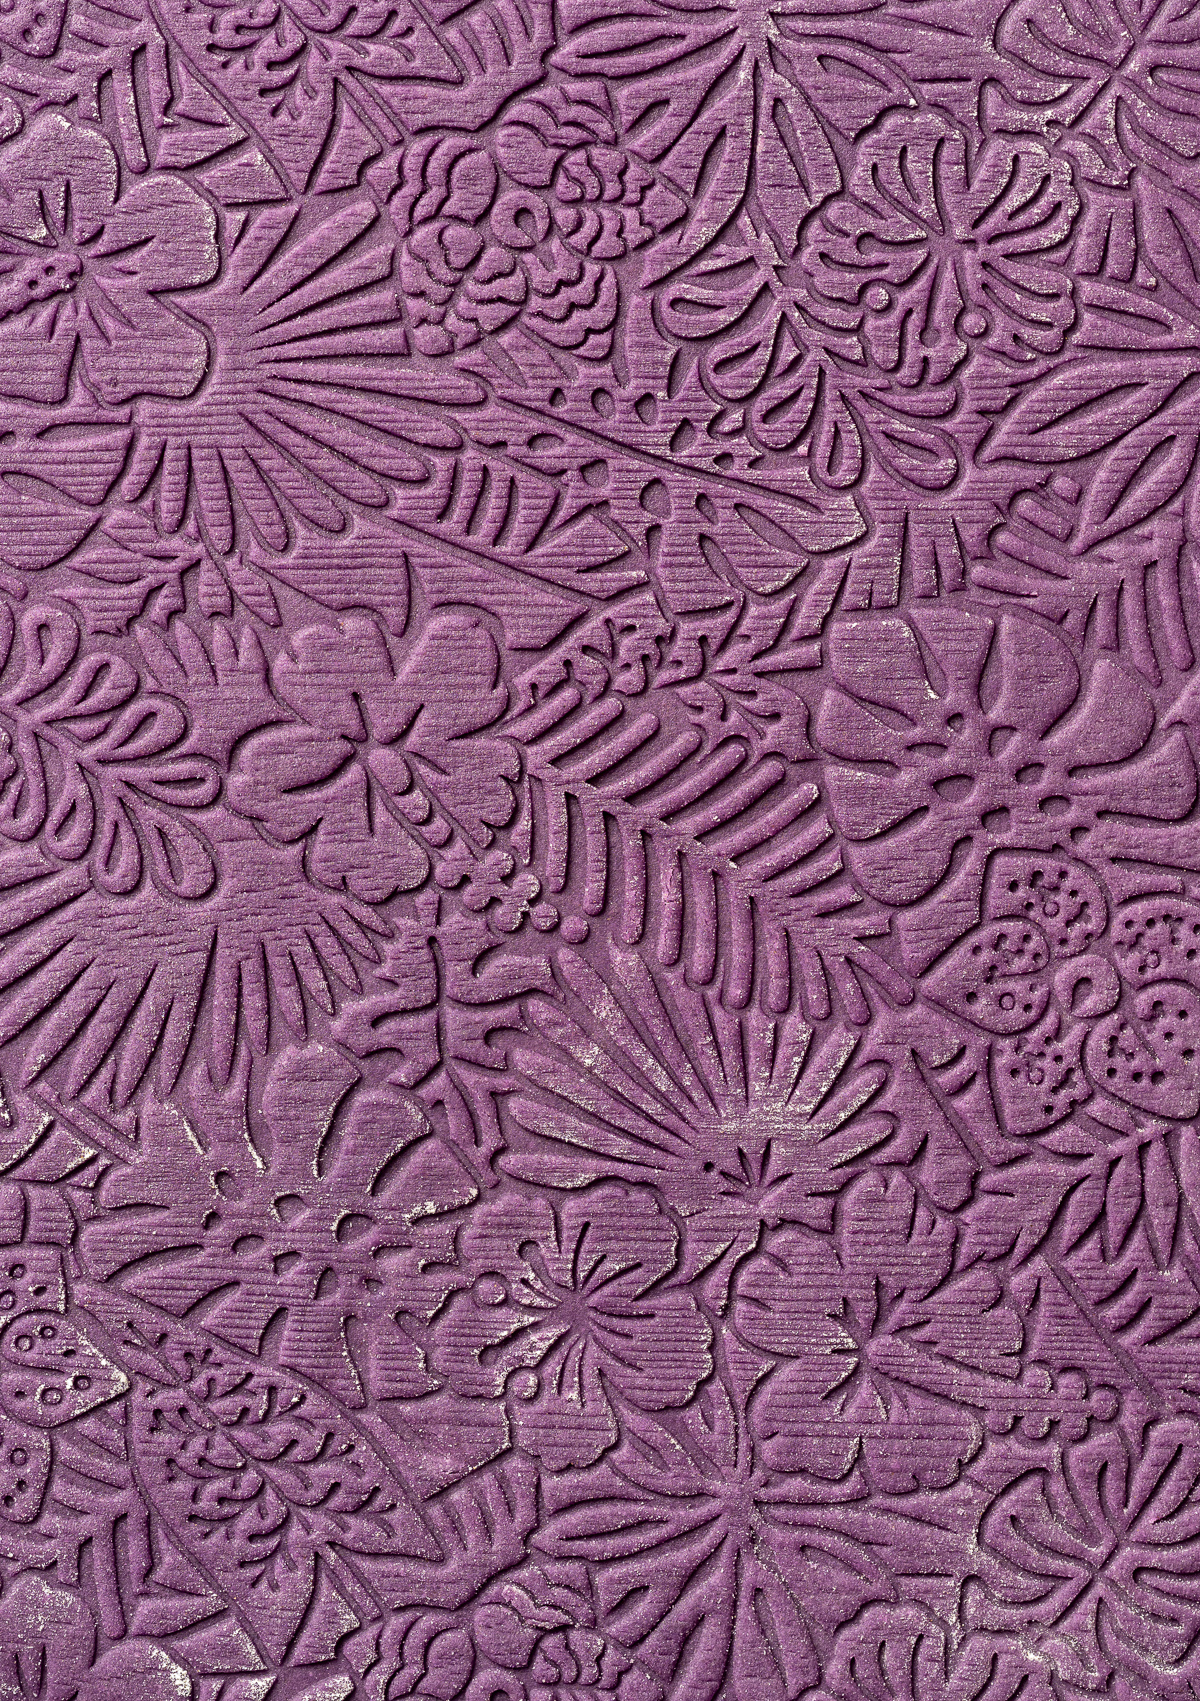 purple cookie dough embossed with tropical leaves and flowers